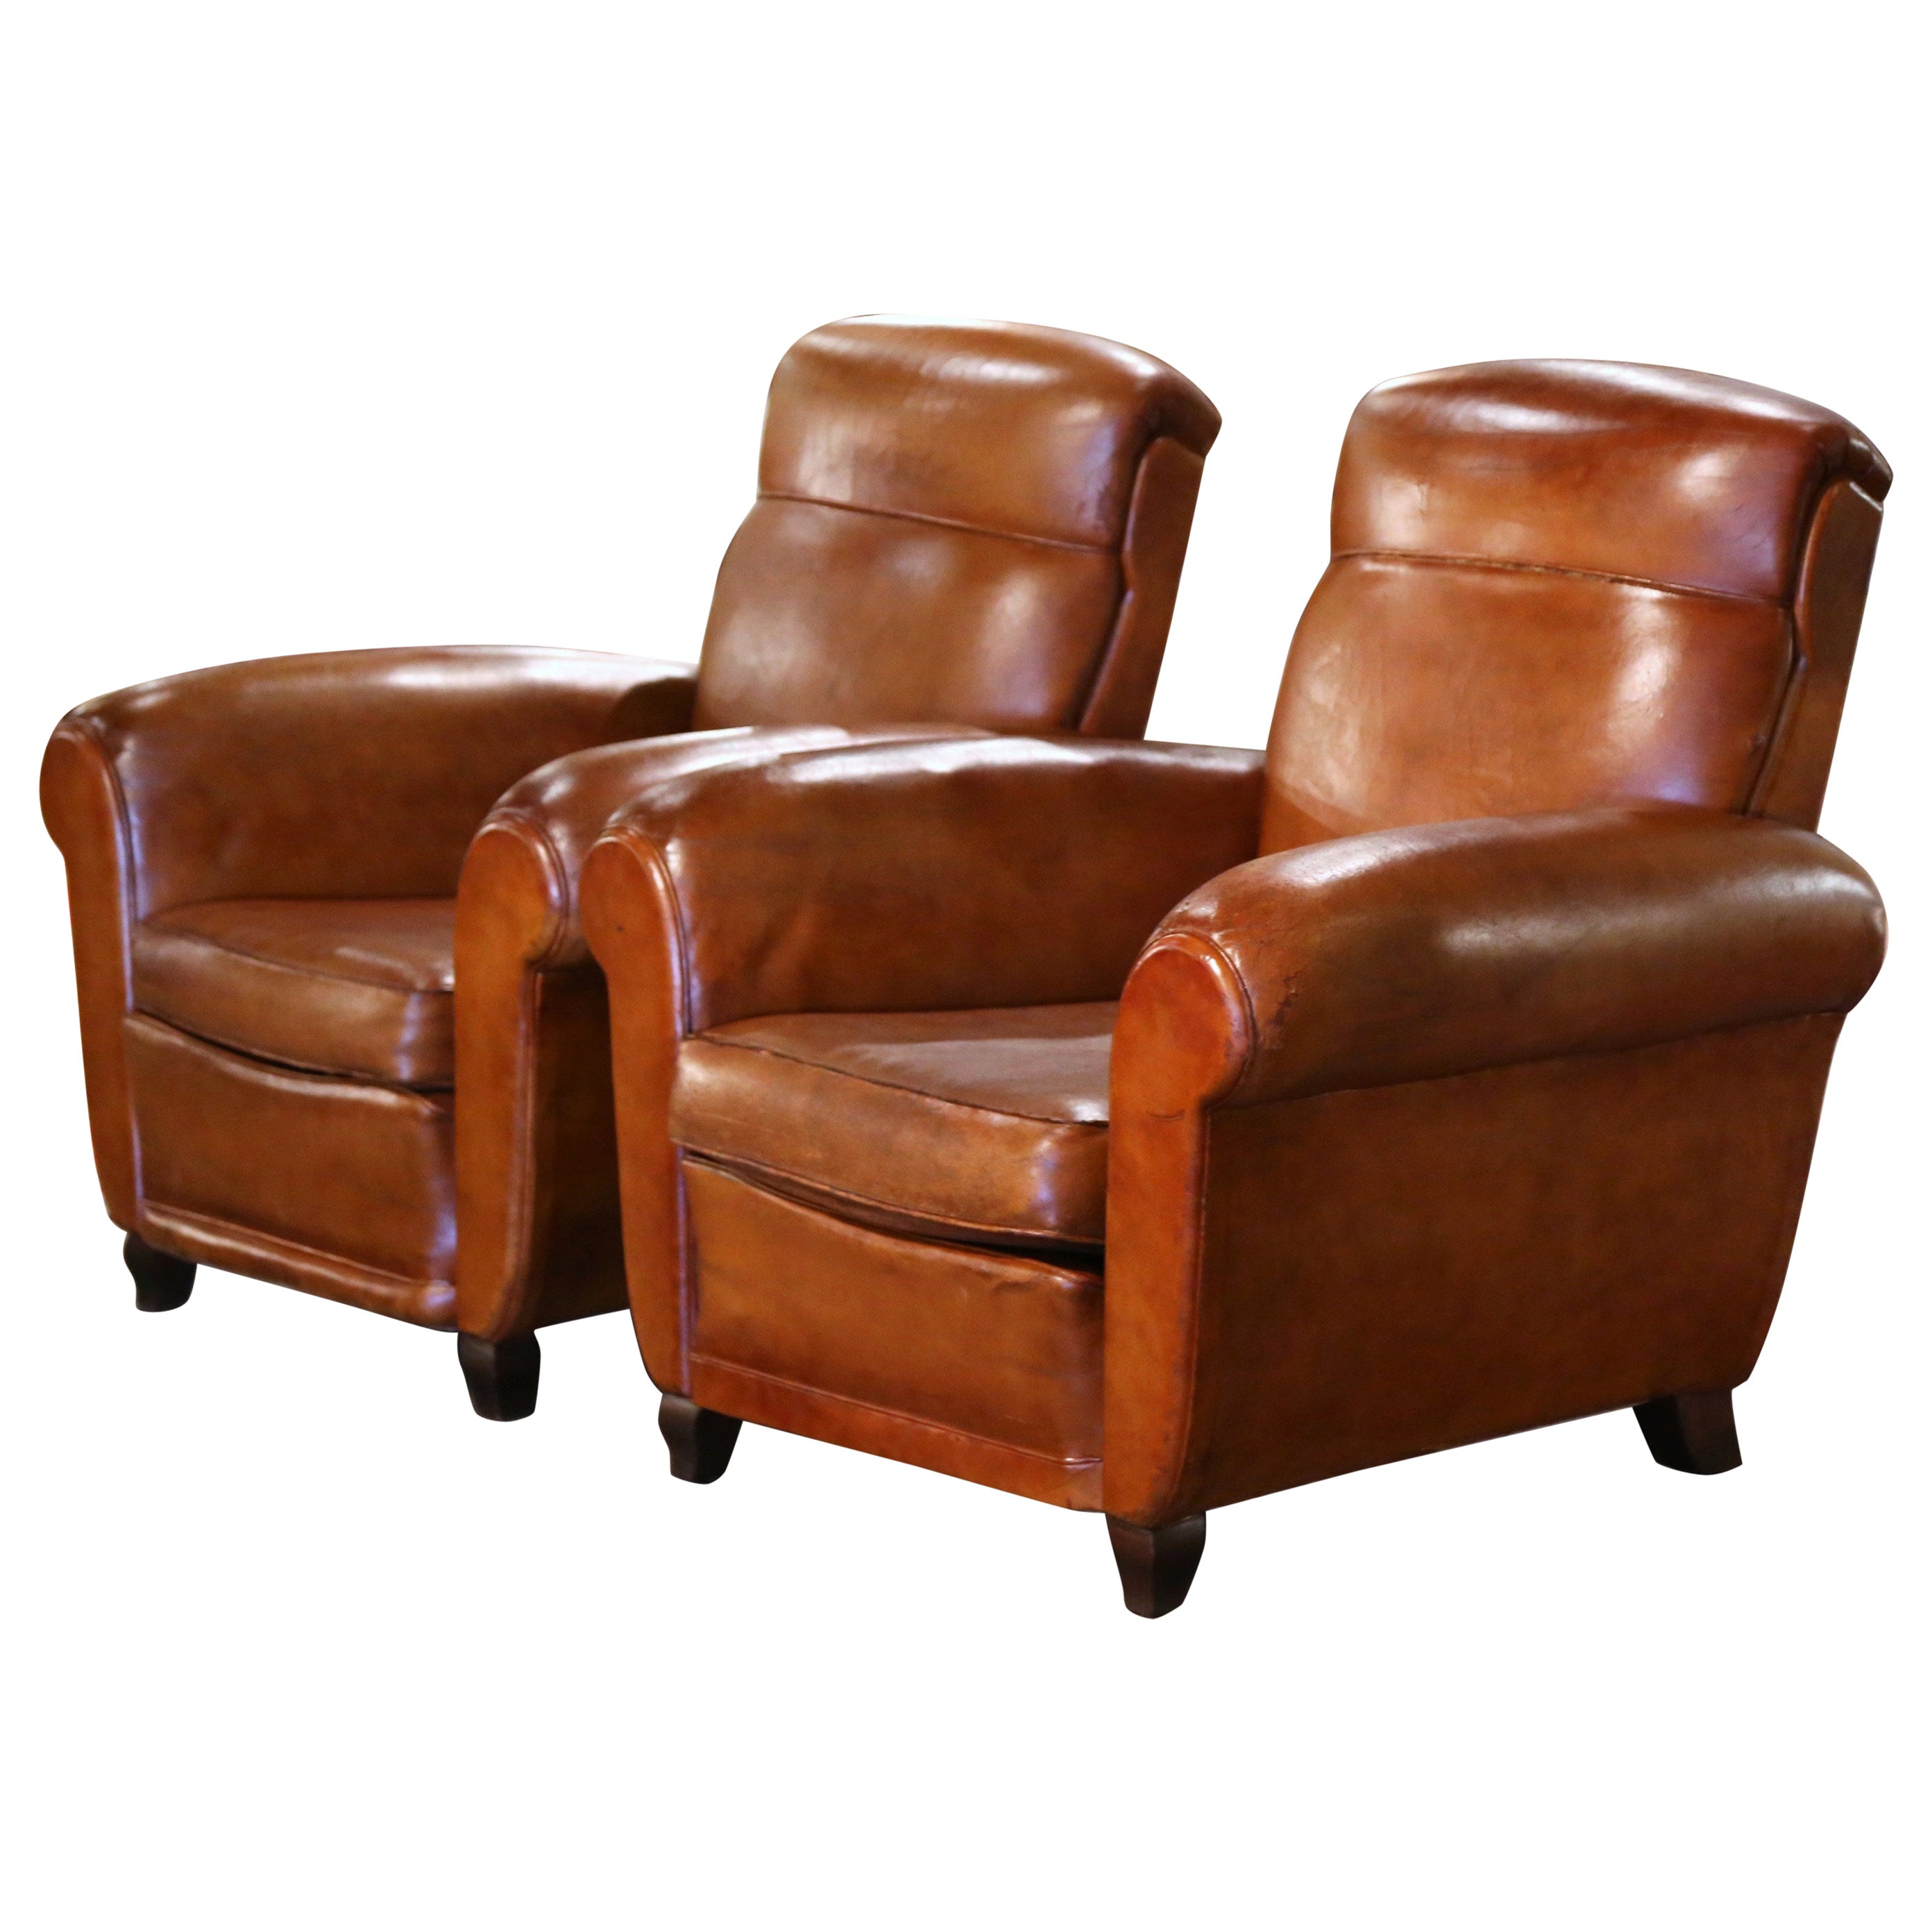 Pair of 1920s French Art Deco Club Armchairs with Original Brown Leather For Sale